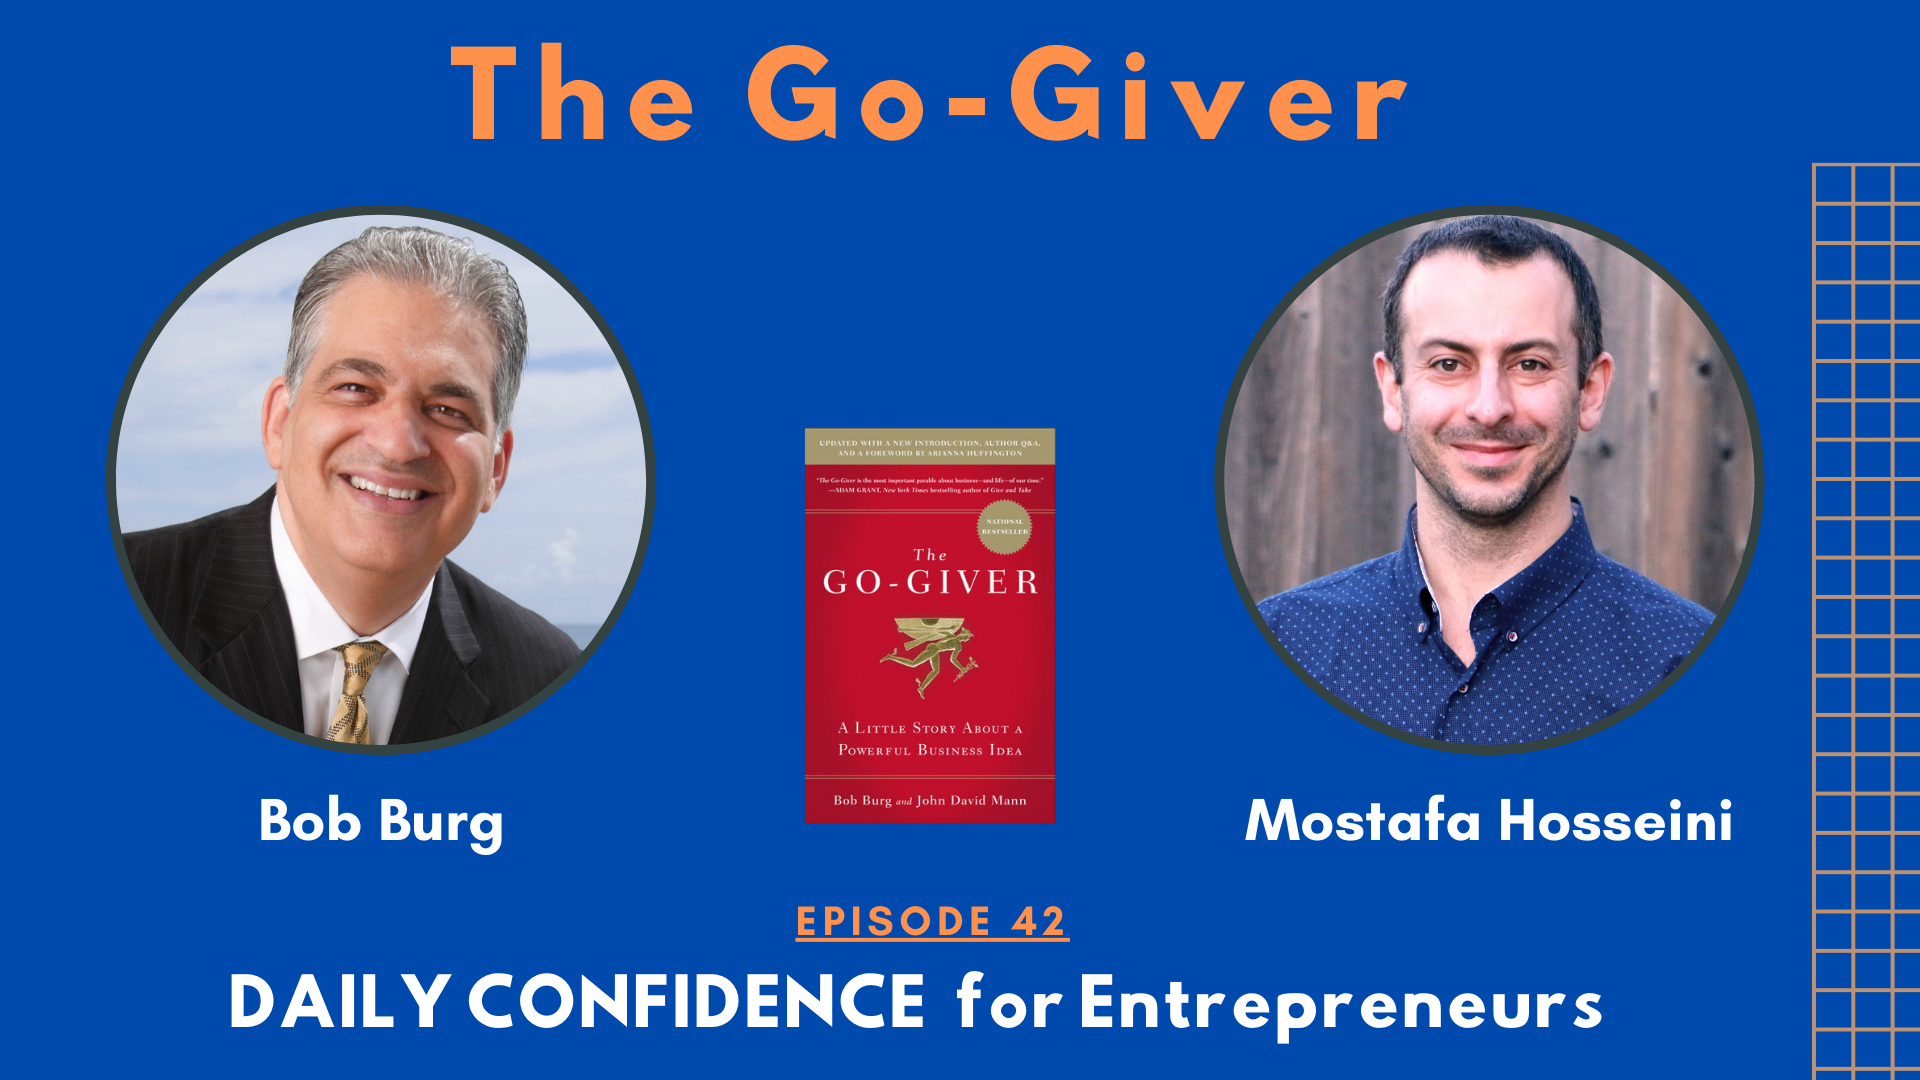 The Go-Giver Way An Interview with Bob Burg